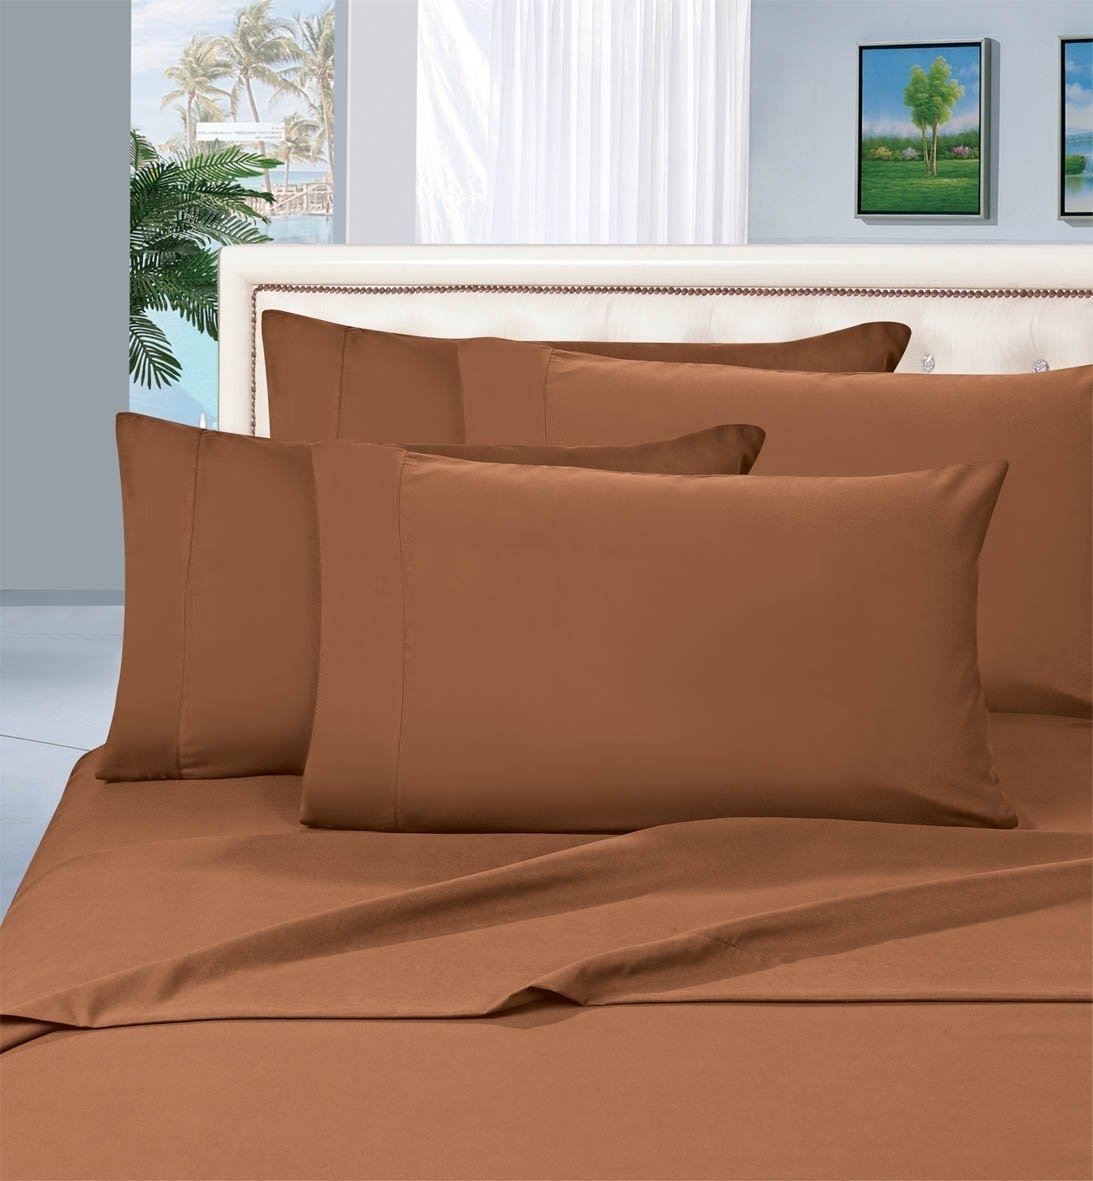 Elegant Comfort 1500 Series Wrinkle Resistant Egyptian Quality Hypoallergenic Ultra Soft Luxury 4-piece Bed Sheet Set, King, Mocha Chocolate